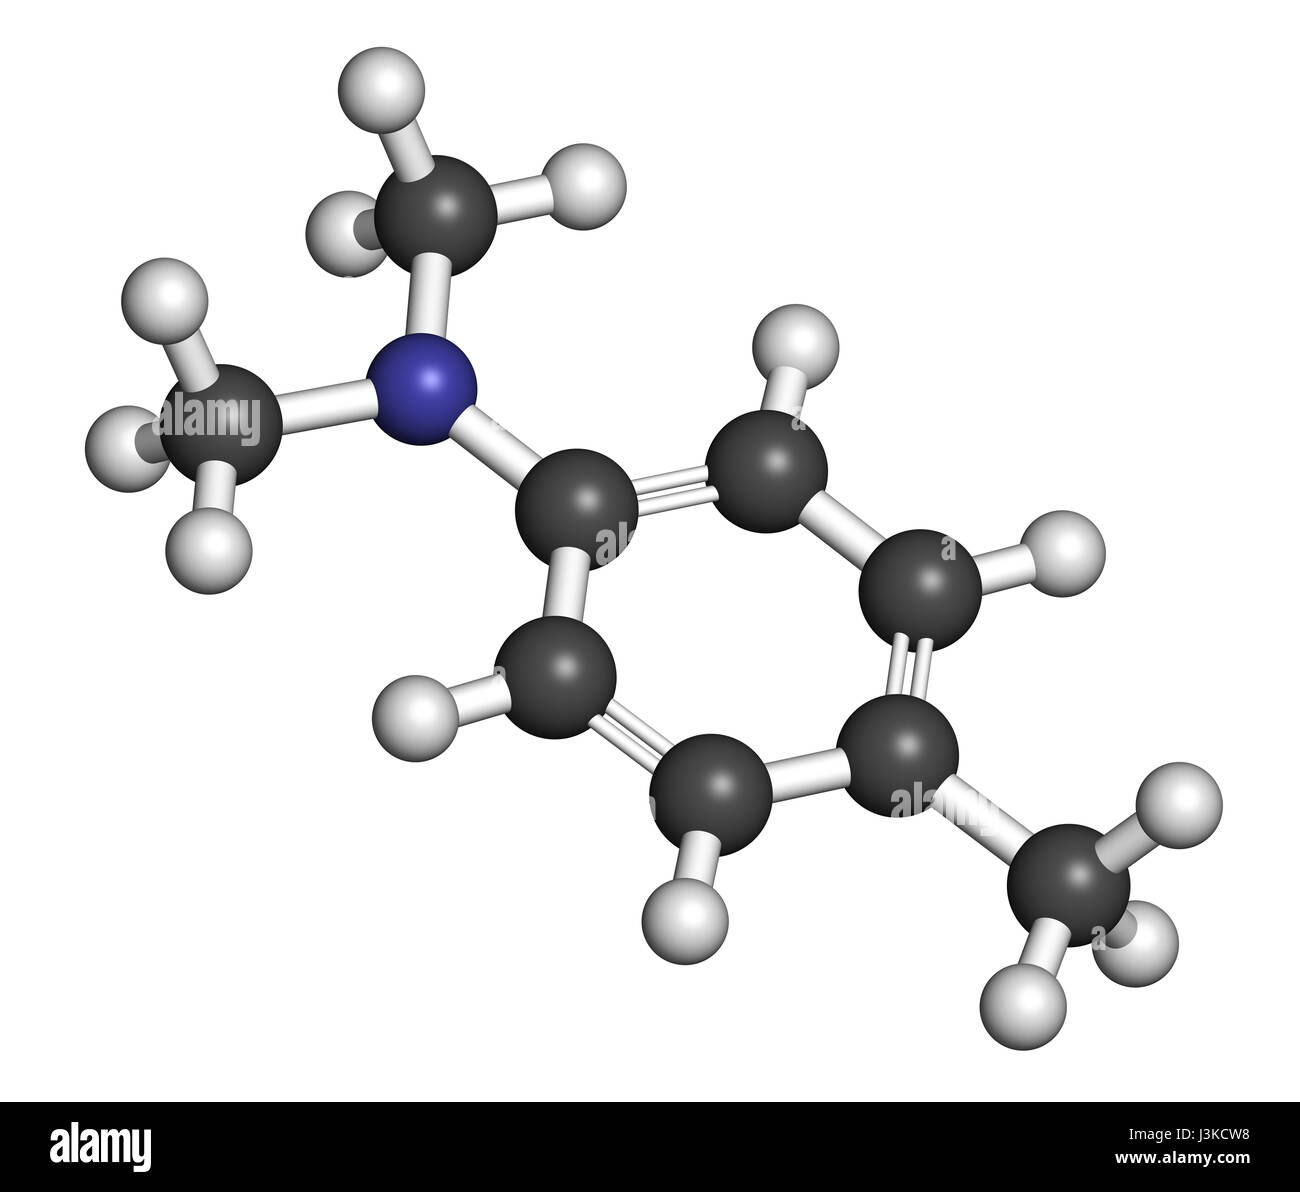 N,N-dimethyl-p-toluidine (DMPT) molecule. Commonly used as catalyst in the production of polymers and in dental materials and bone cements. Atoms are  Stock Photo